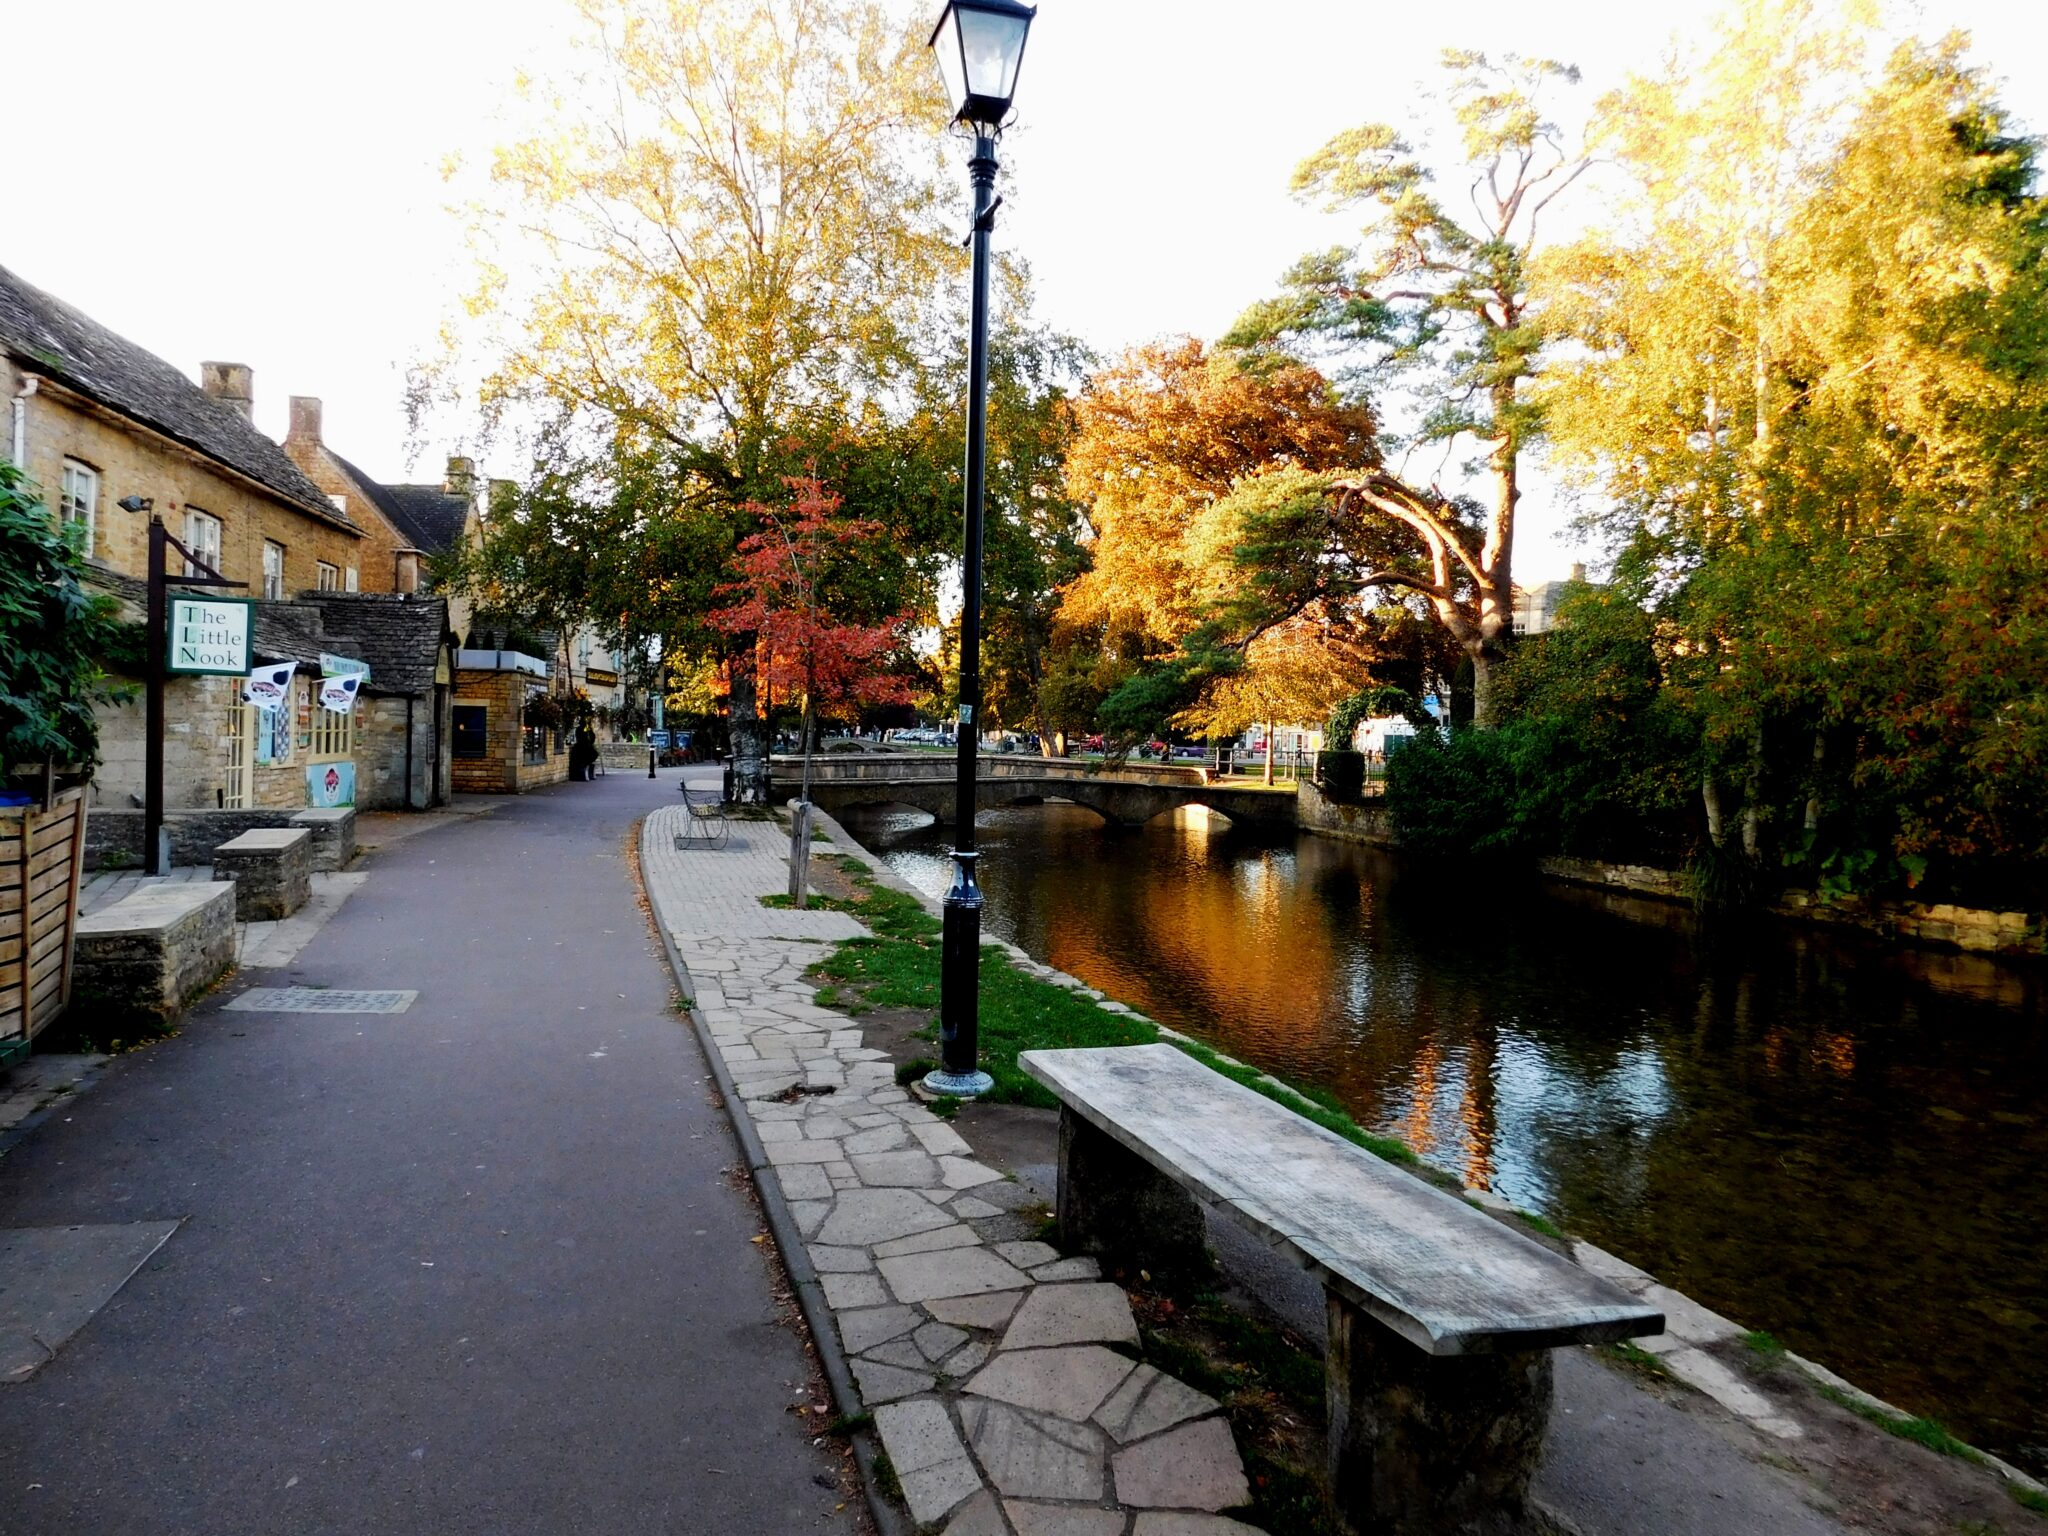 Bourton on the Water - photo by debbiemg on pxhere